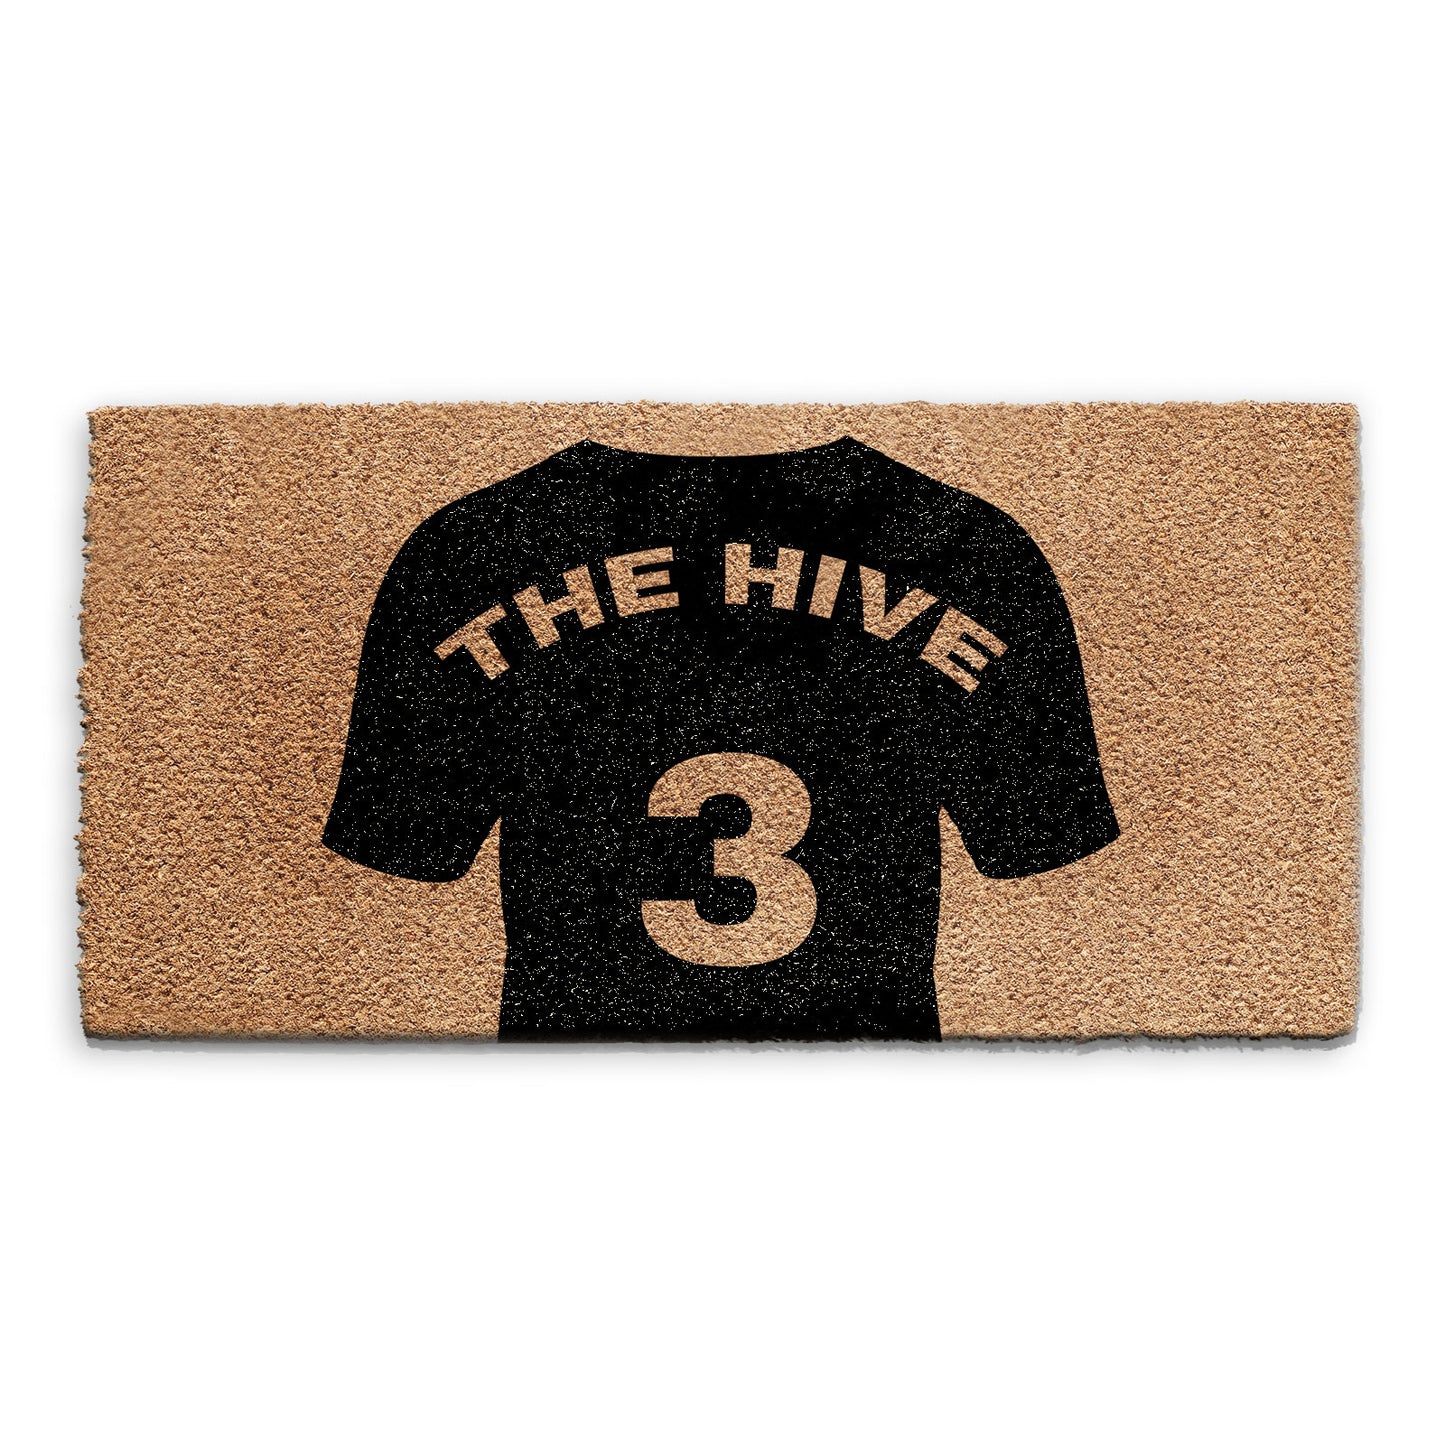 Personalised Doormat - Football Shirt and Number